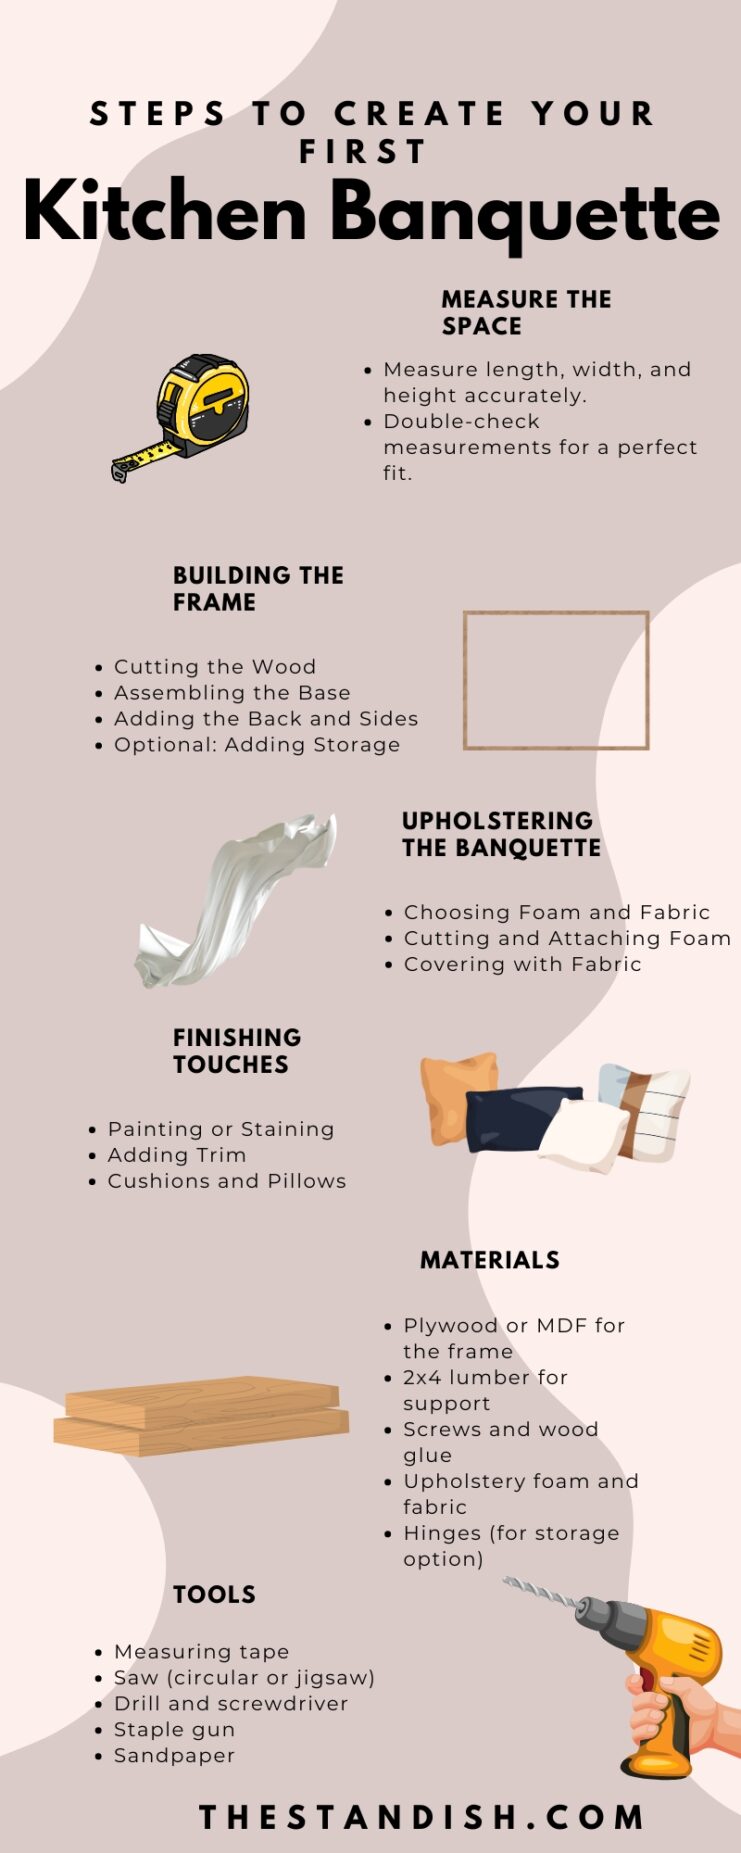 Steps to Create Your First Kitchen Banquette Infographic